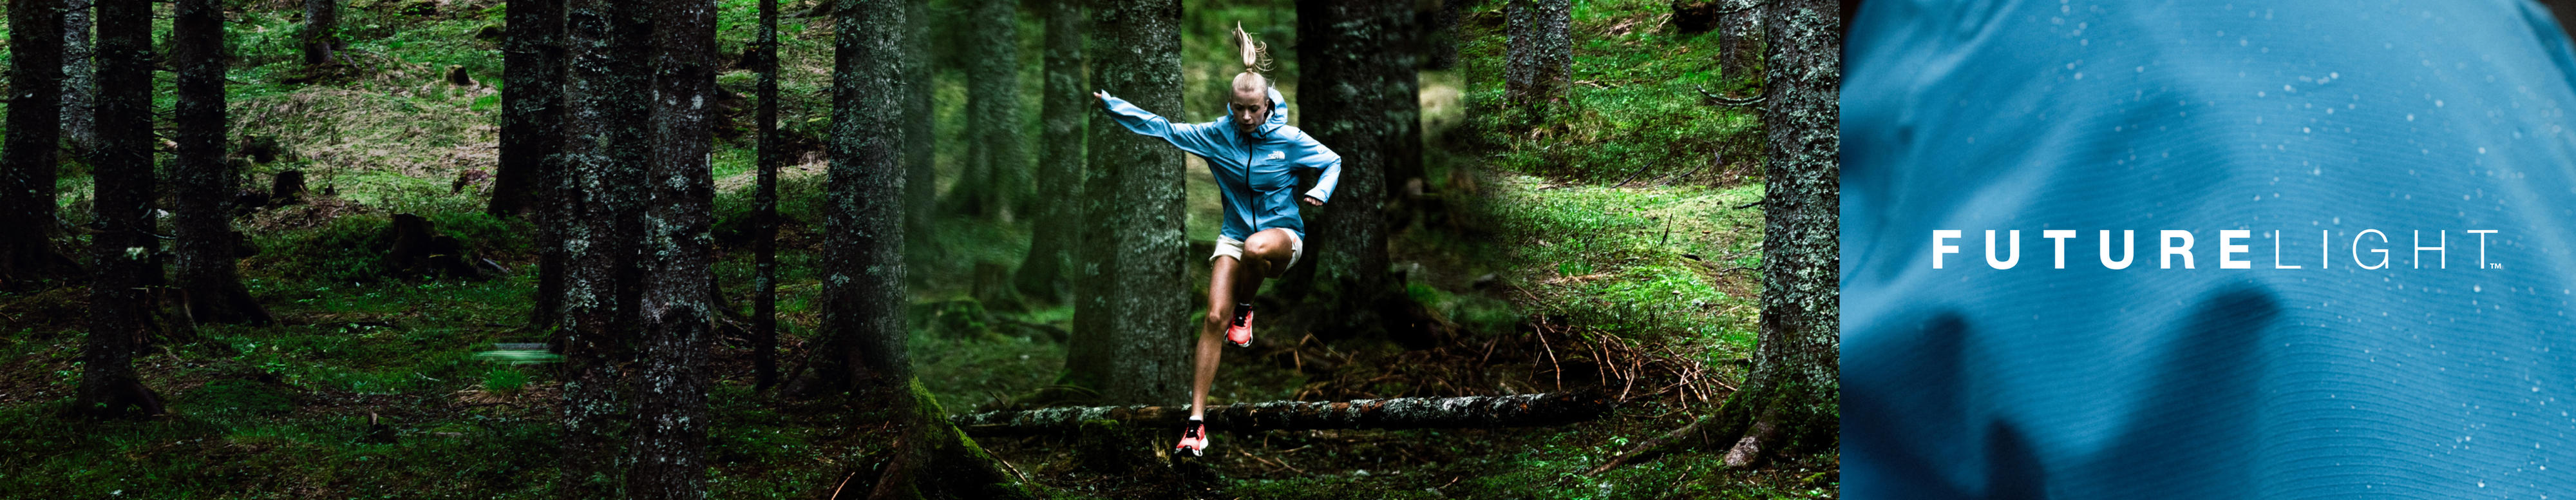 A trail runner hurdles over an obstacle in a lush forest.